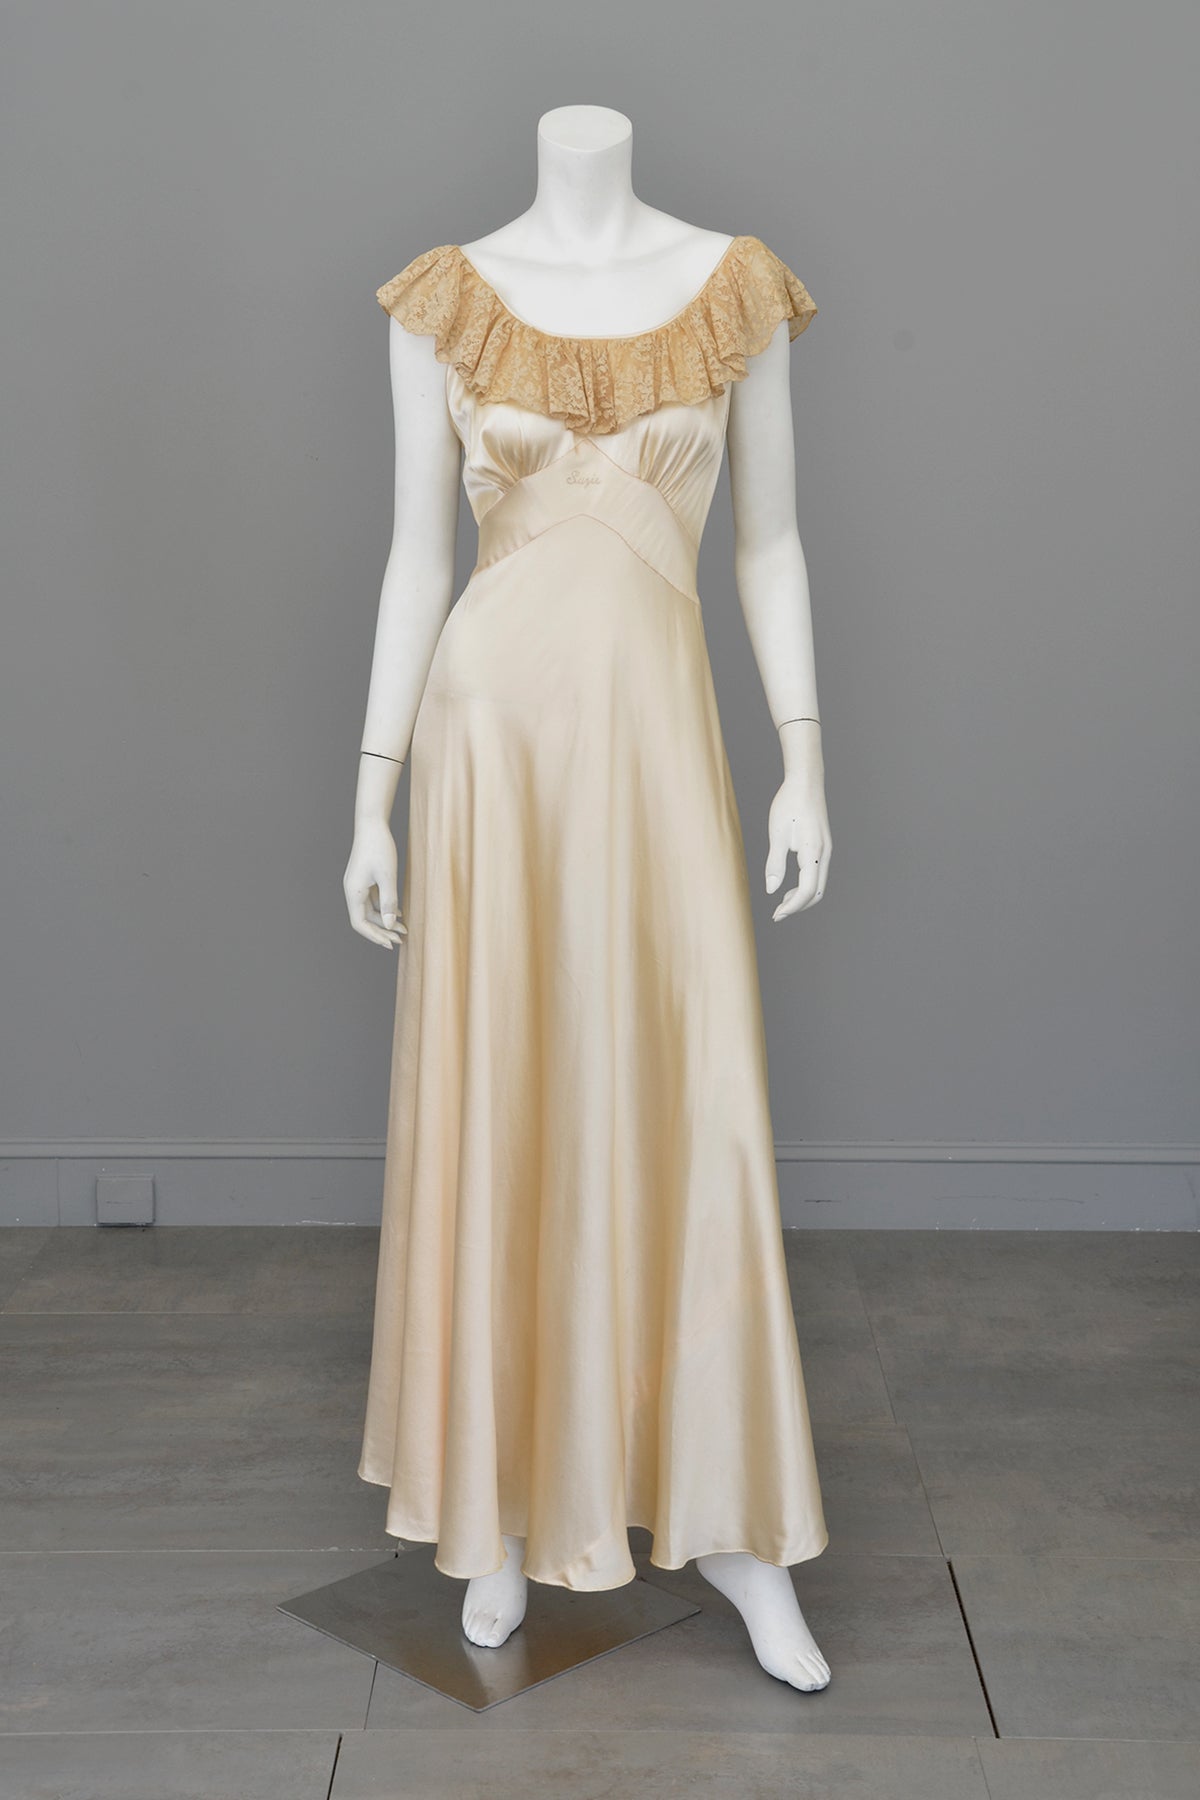 1930s Cream Silk Satin Lace Gown | Lace Flounce Negligee Gown Slip Suz ...